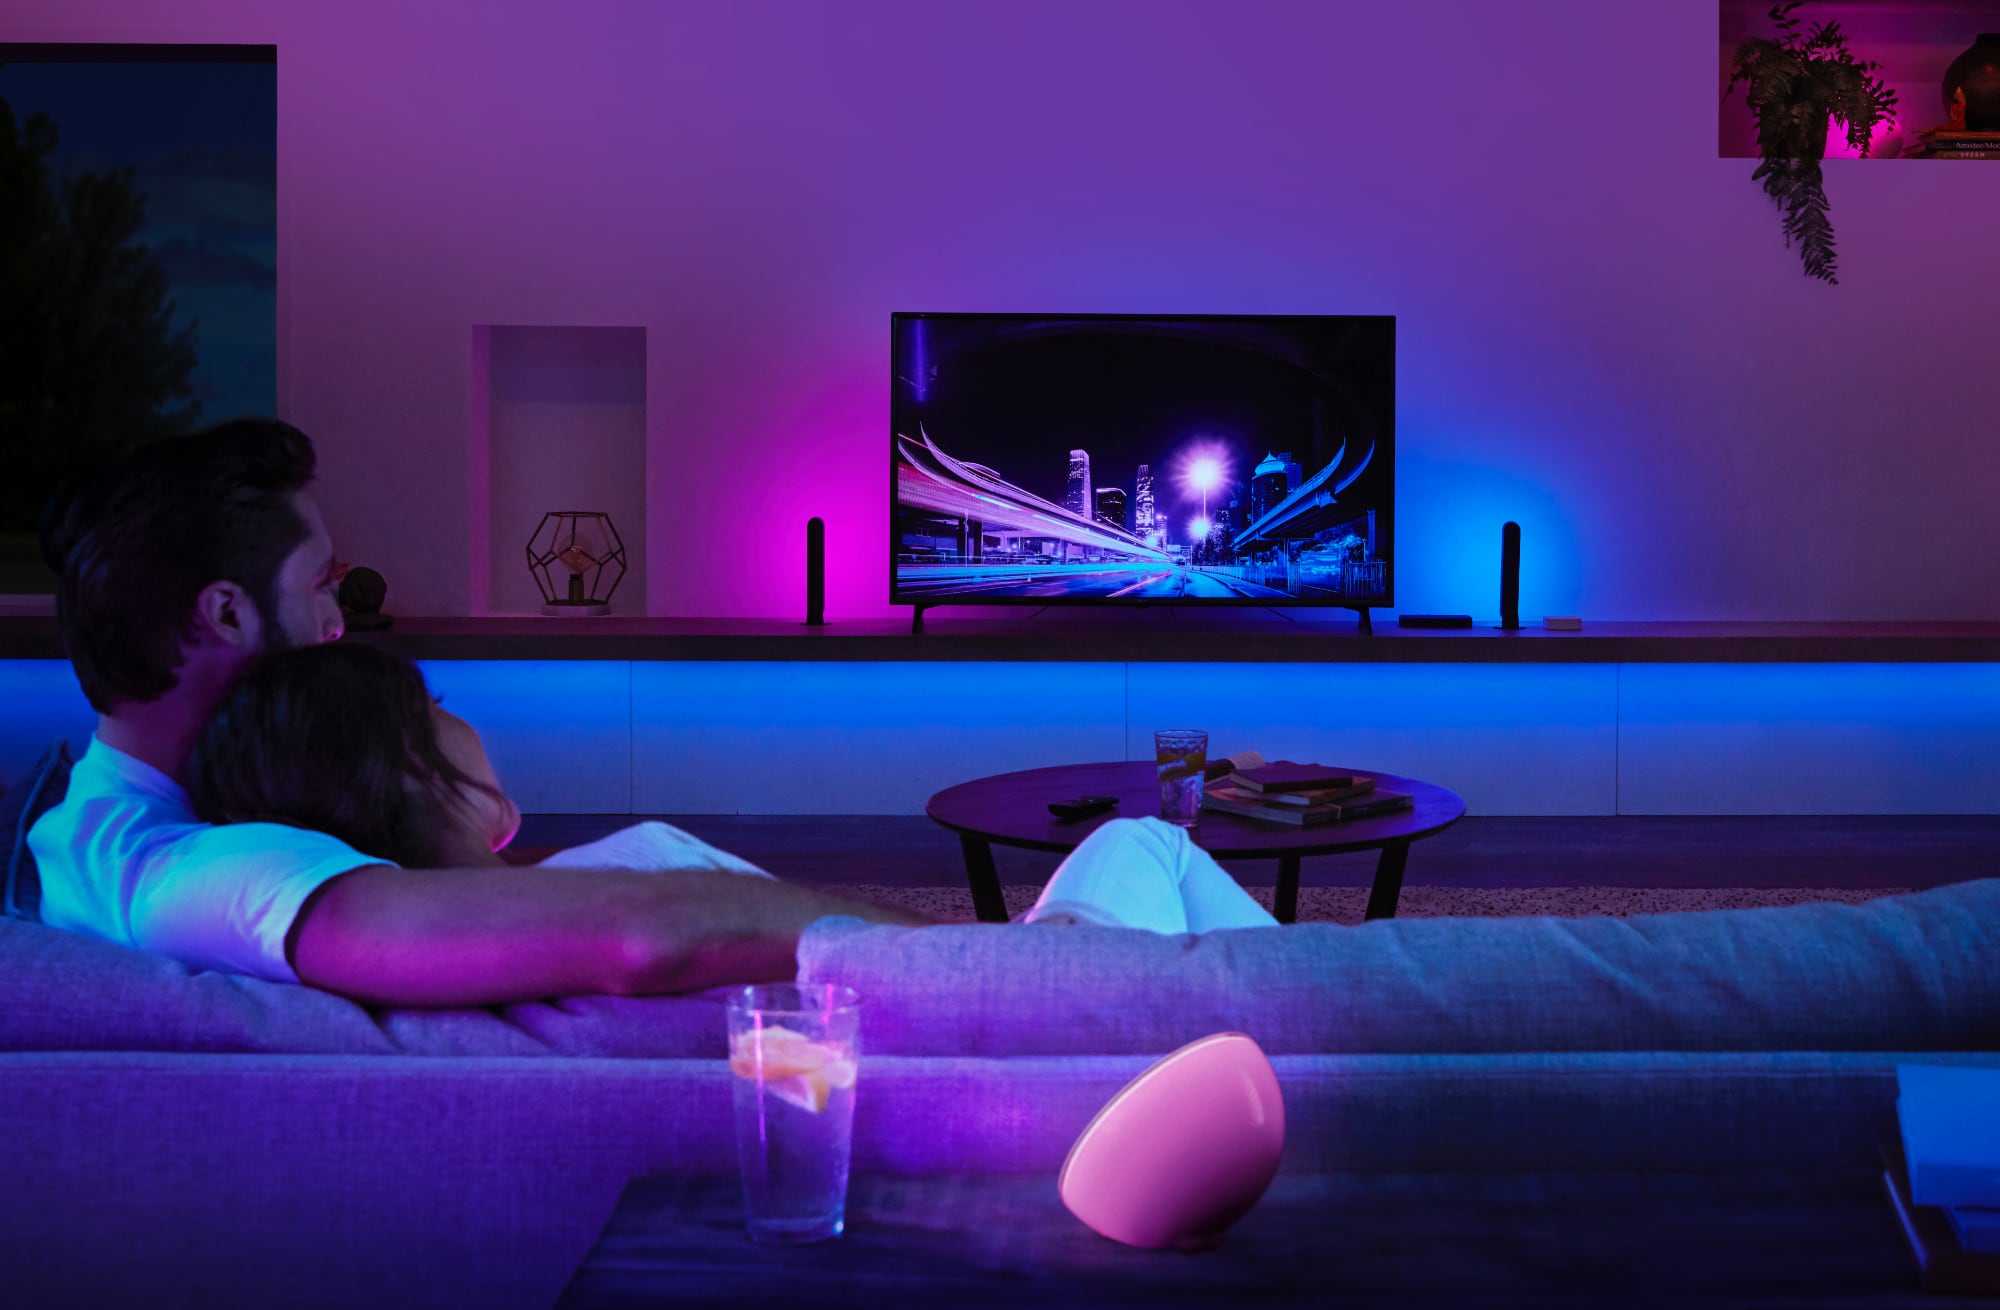 Philips Hue box gains support for Dolby Vision, HDR10+ - FlatpanelsHD